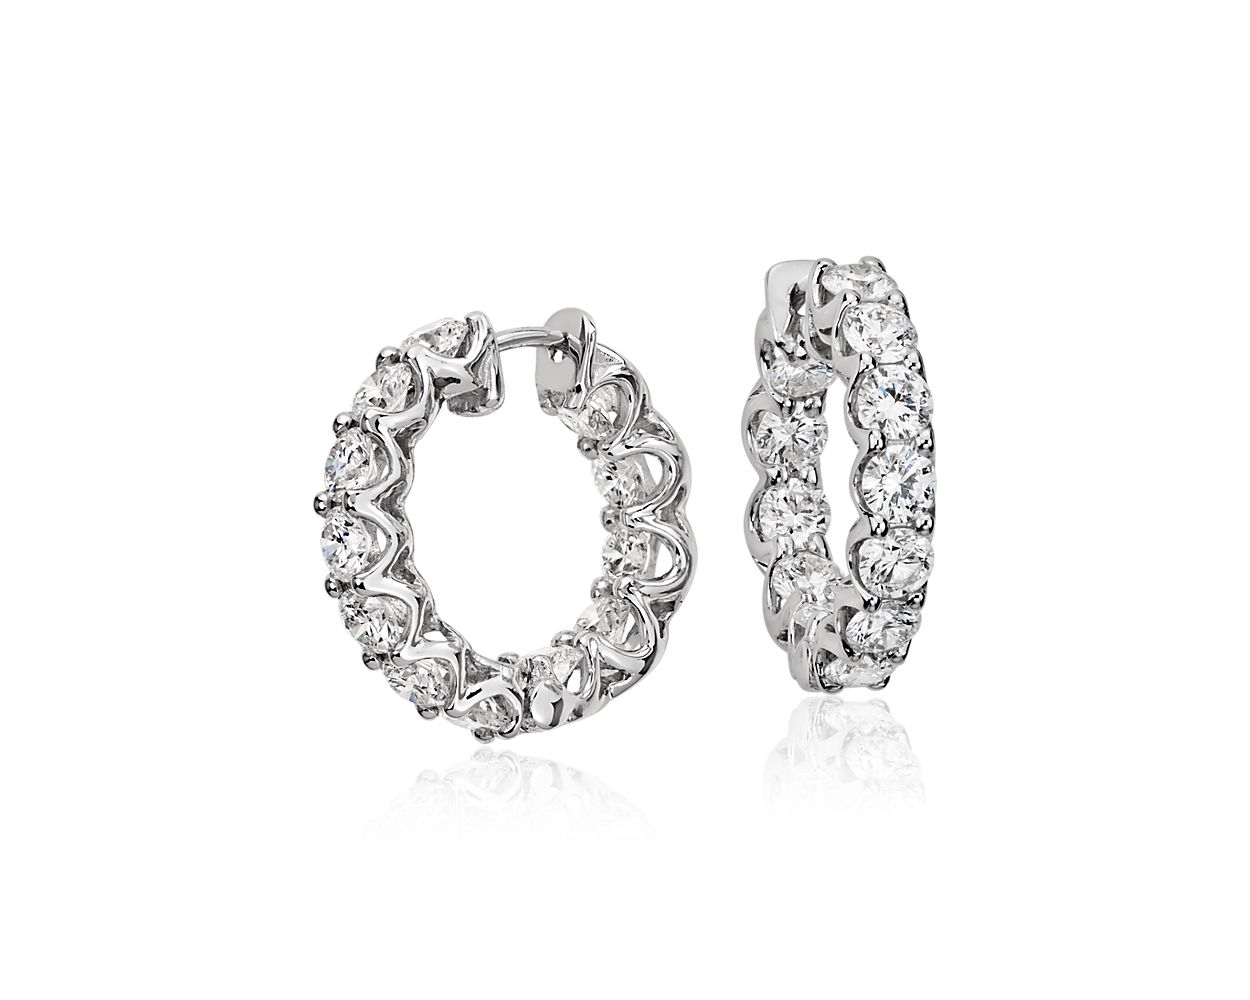 Eternity Rings & Wedding Bands at Phillip Stoner The Jeweller